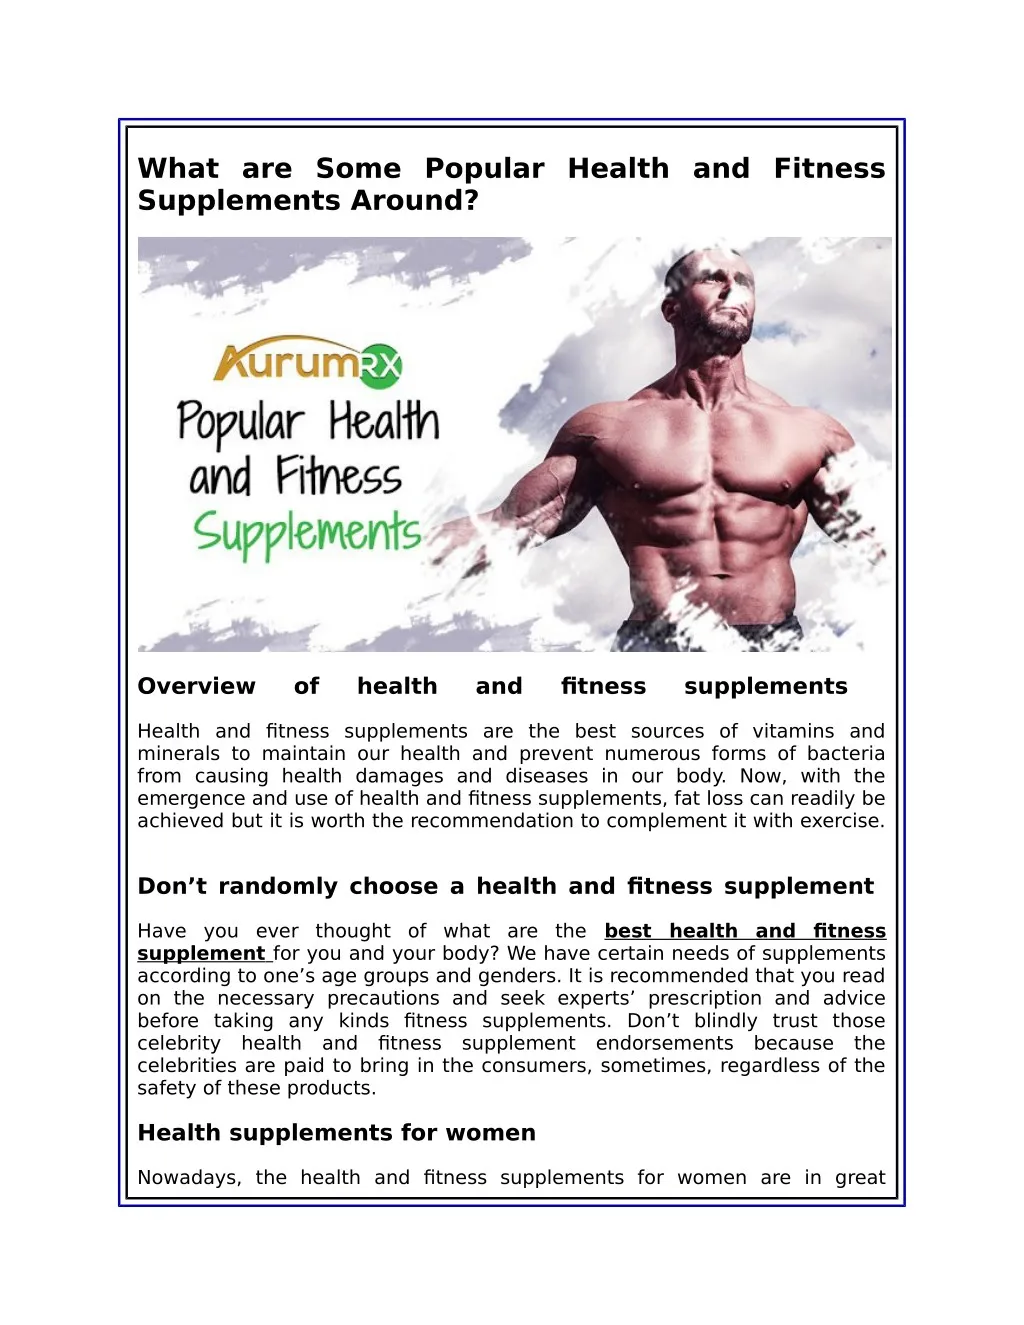 what are some popular health and fitness